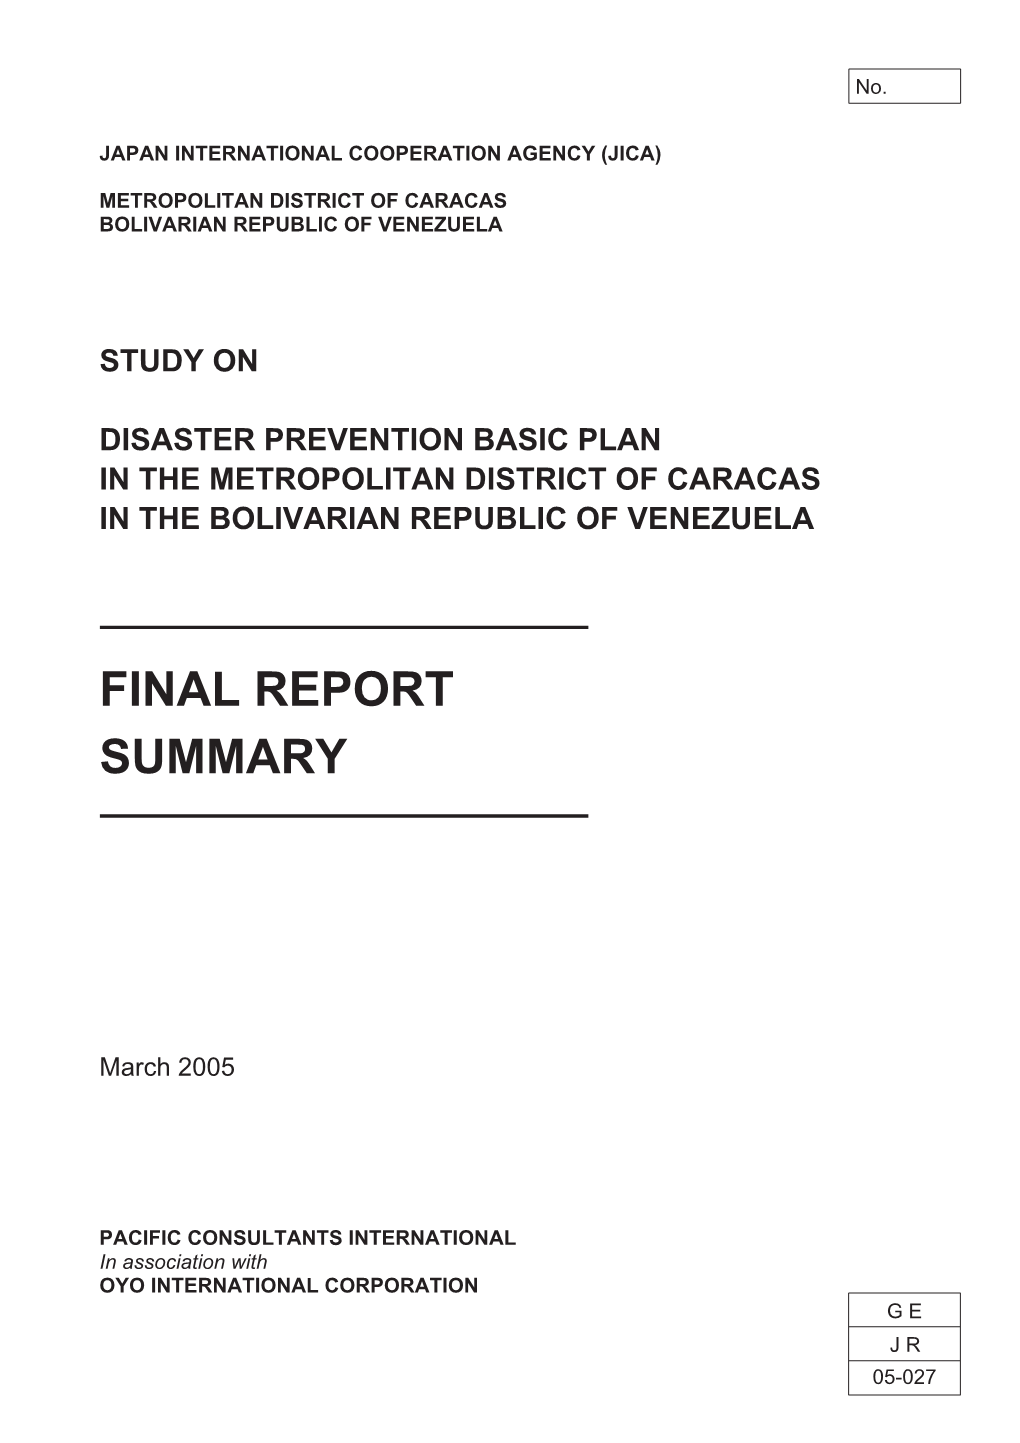 Study on Disaster Prevention Basic Plan in the Metropolitan District of Caracas